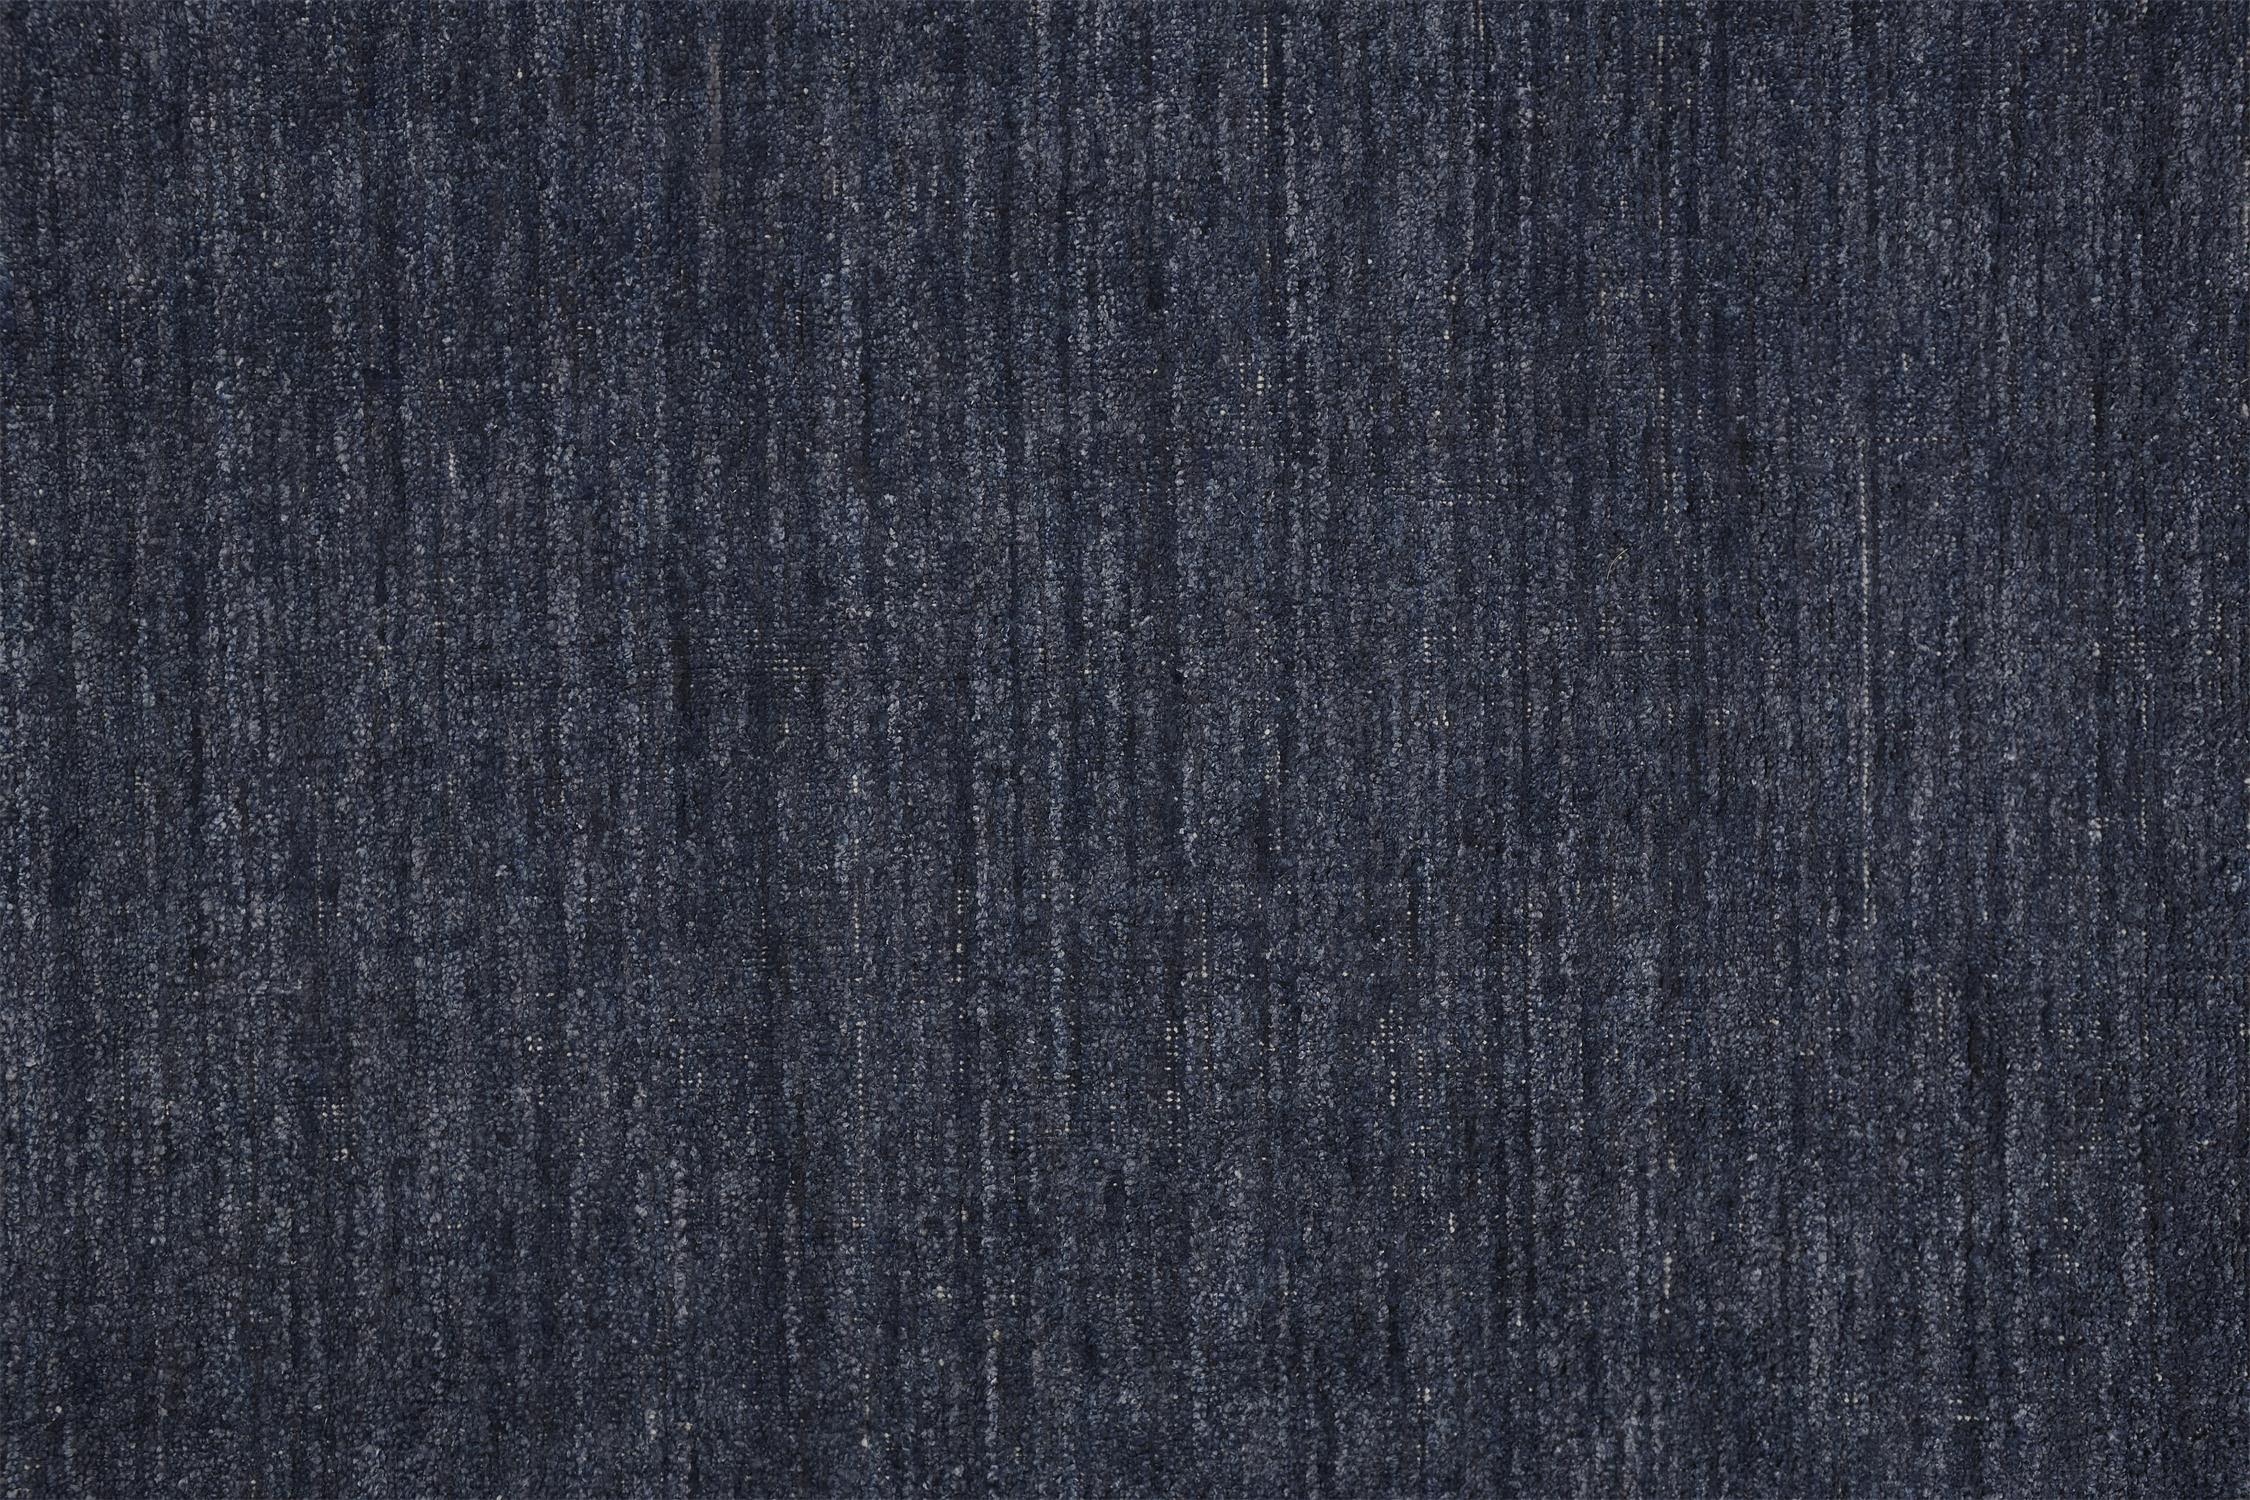 Feizy Area Rugs Delino Transitional Solid, Blue, 2' x 3' Accent 